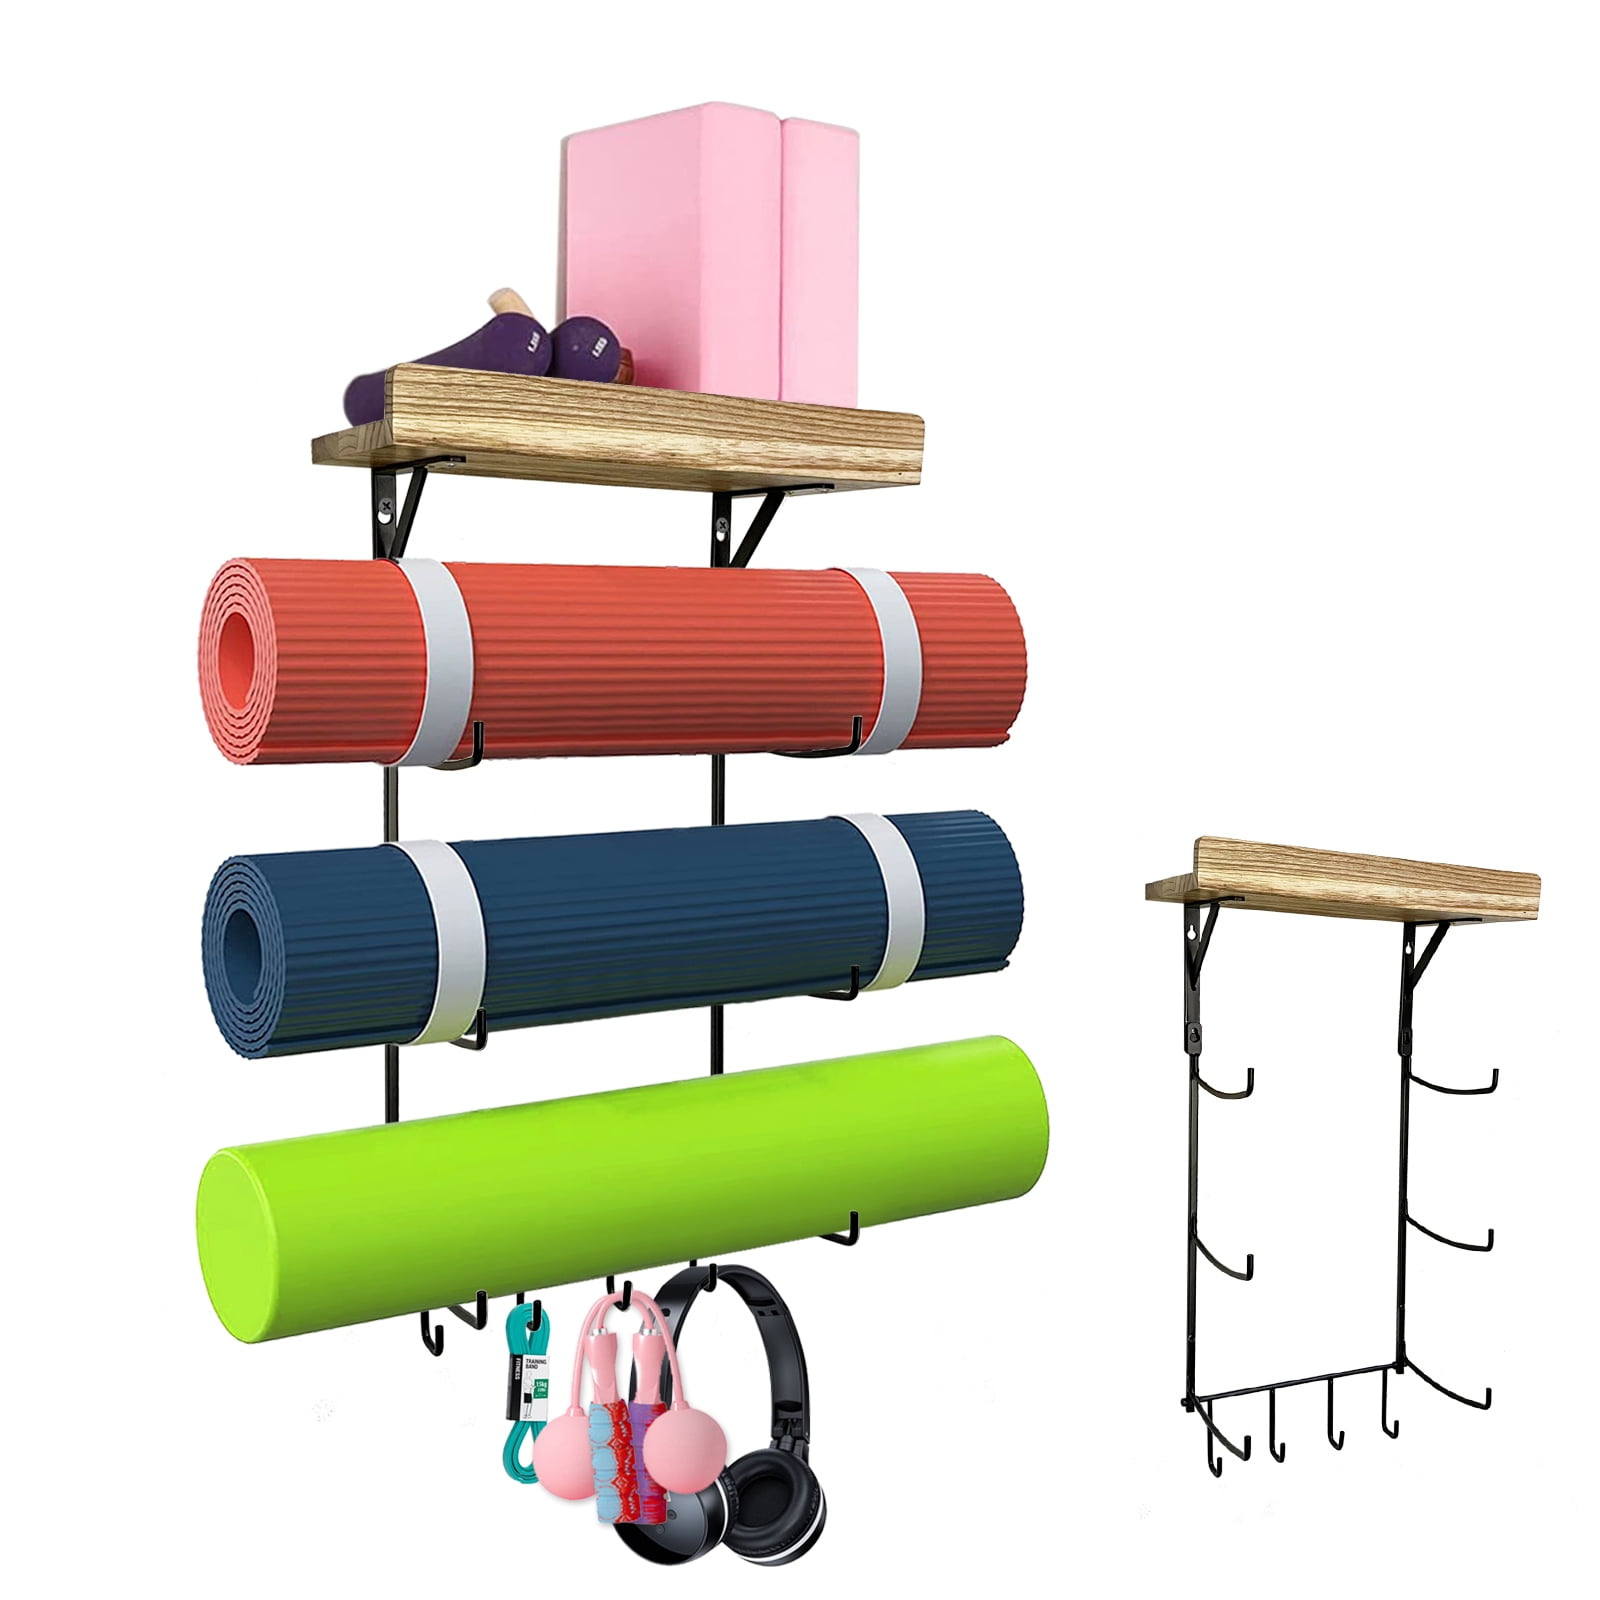  Yoga Mat Holder Wall Mount, Yoga Accessory Mat Storage Rack,  Home Gym Accessories Organizer, Floating Shelf and Hooks for Hanging Foam  Roller/Band/Workout Equipment at Pilates Fitness Class : Sports & Outdoors